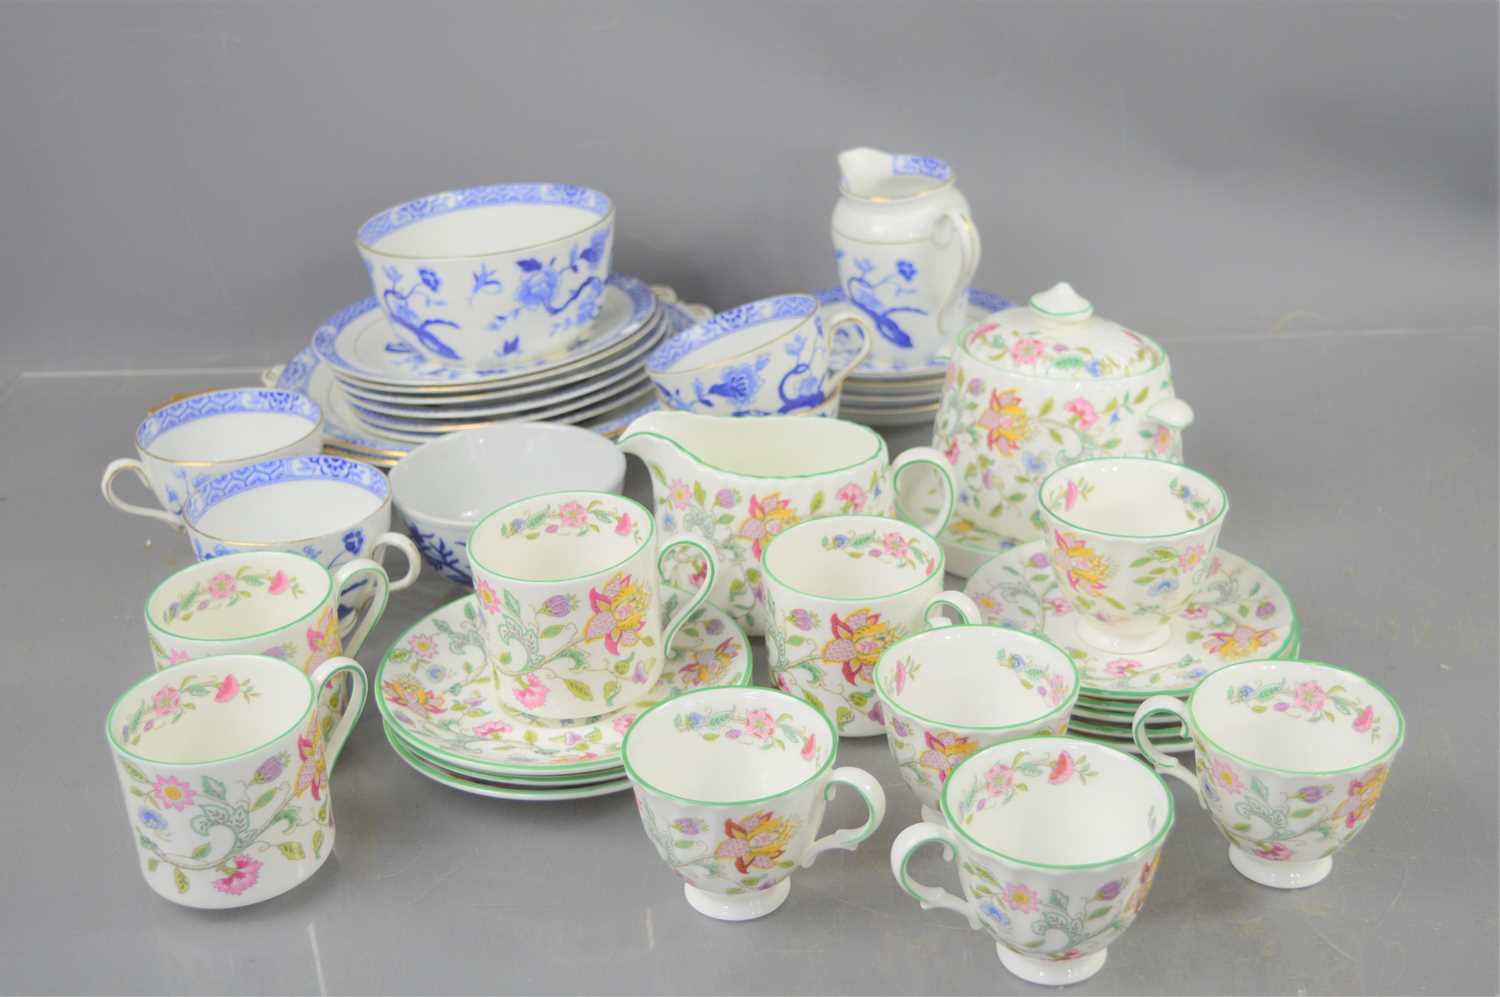 A Minton "Haddon Hall" tea set comprising teapot, cups, saucers and milk jug together with a